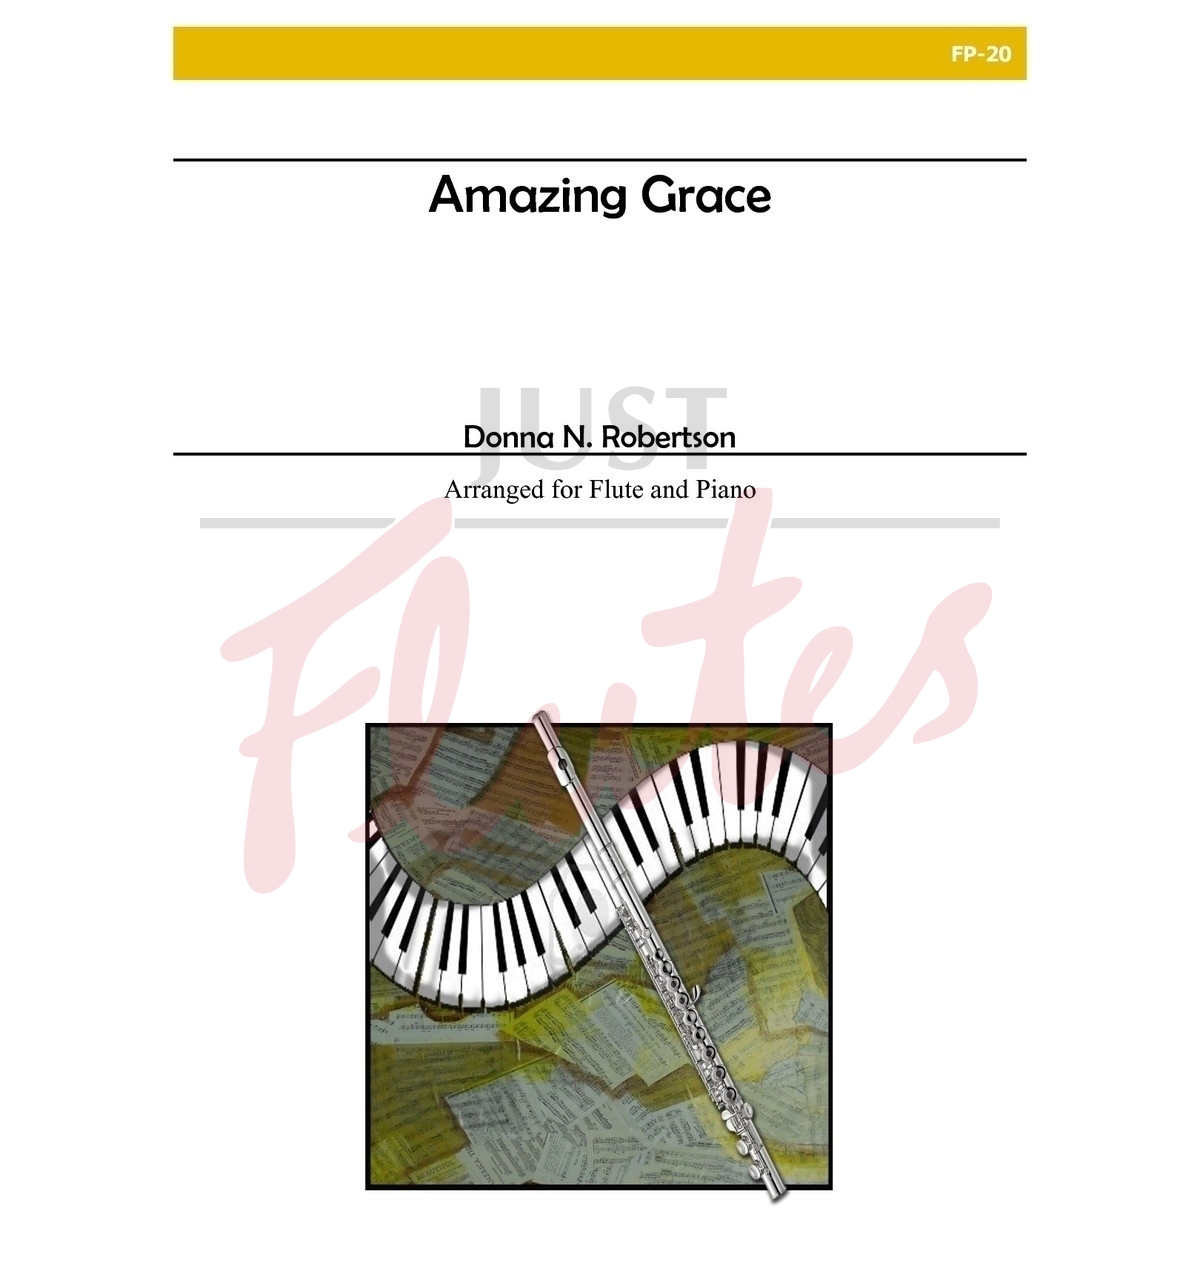 Amazing Grace [Flute and Piano]